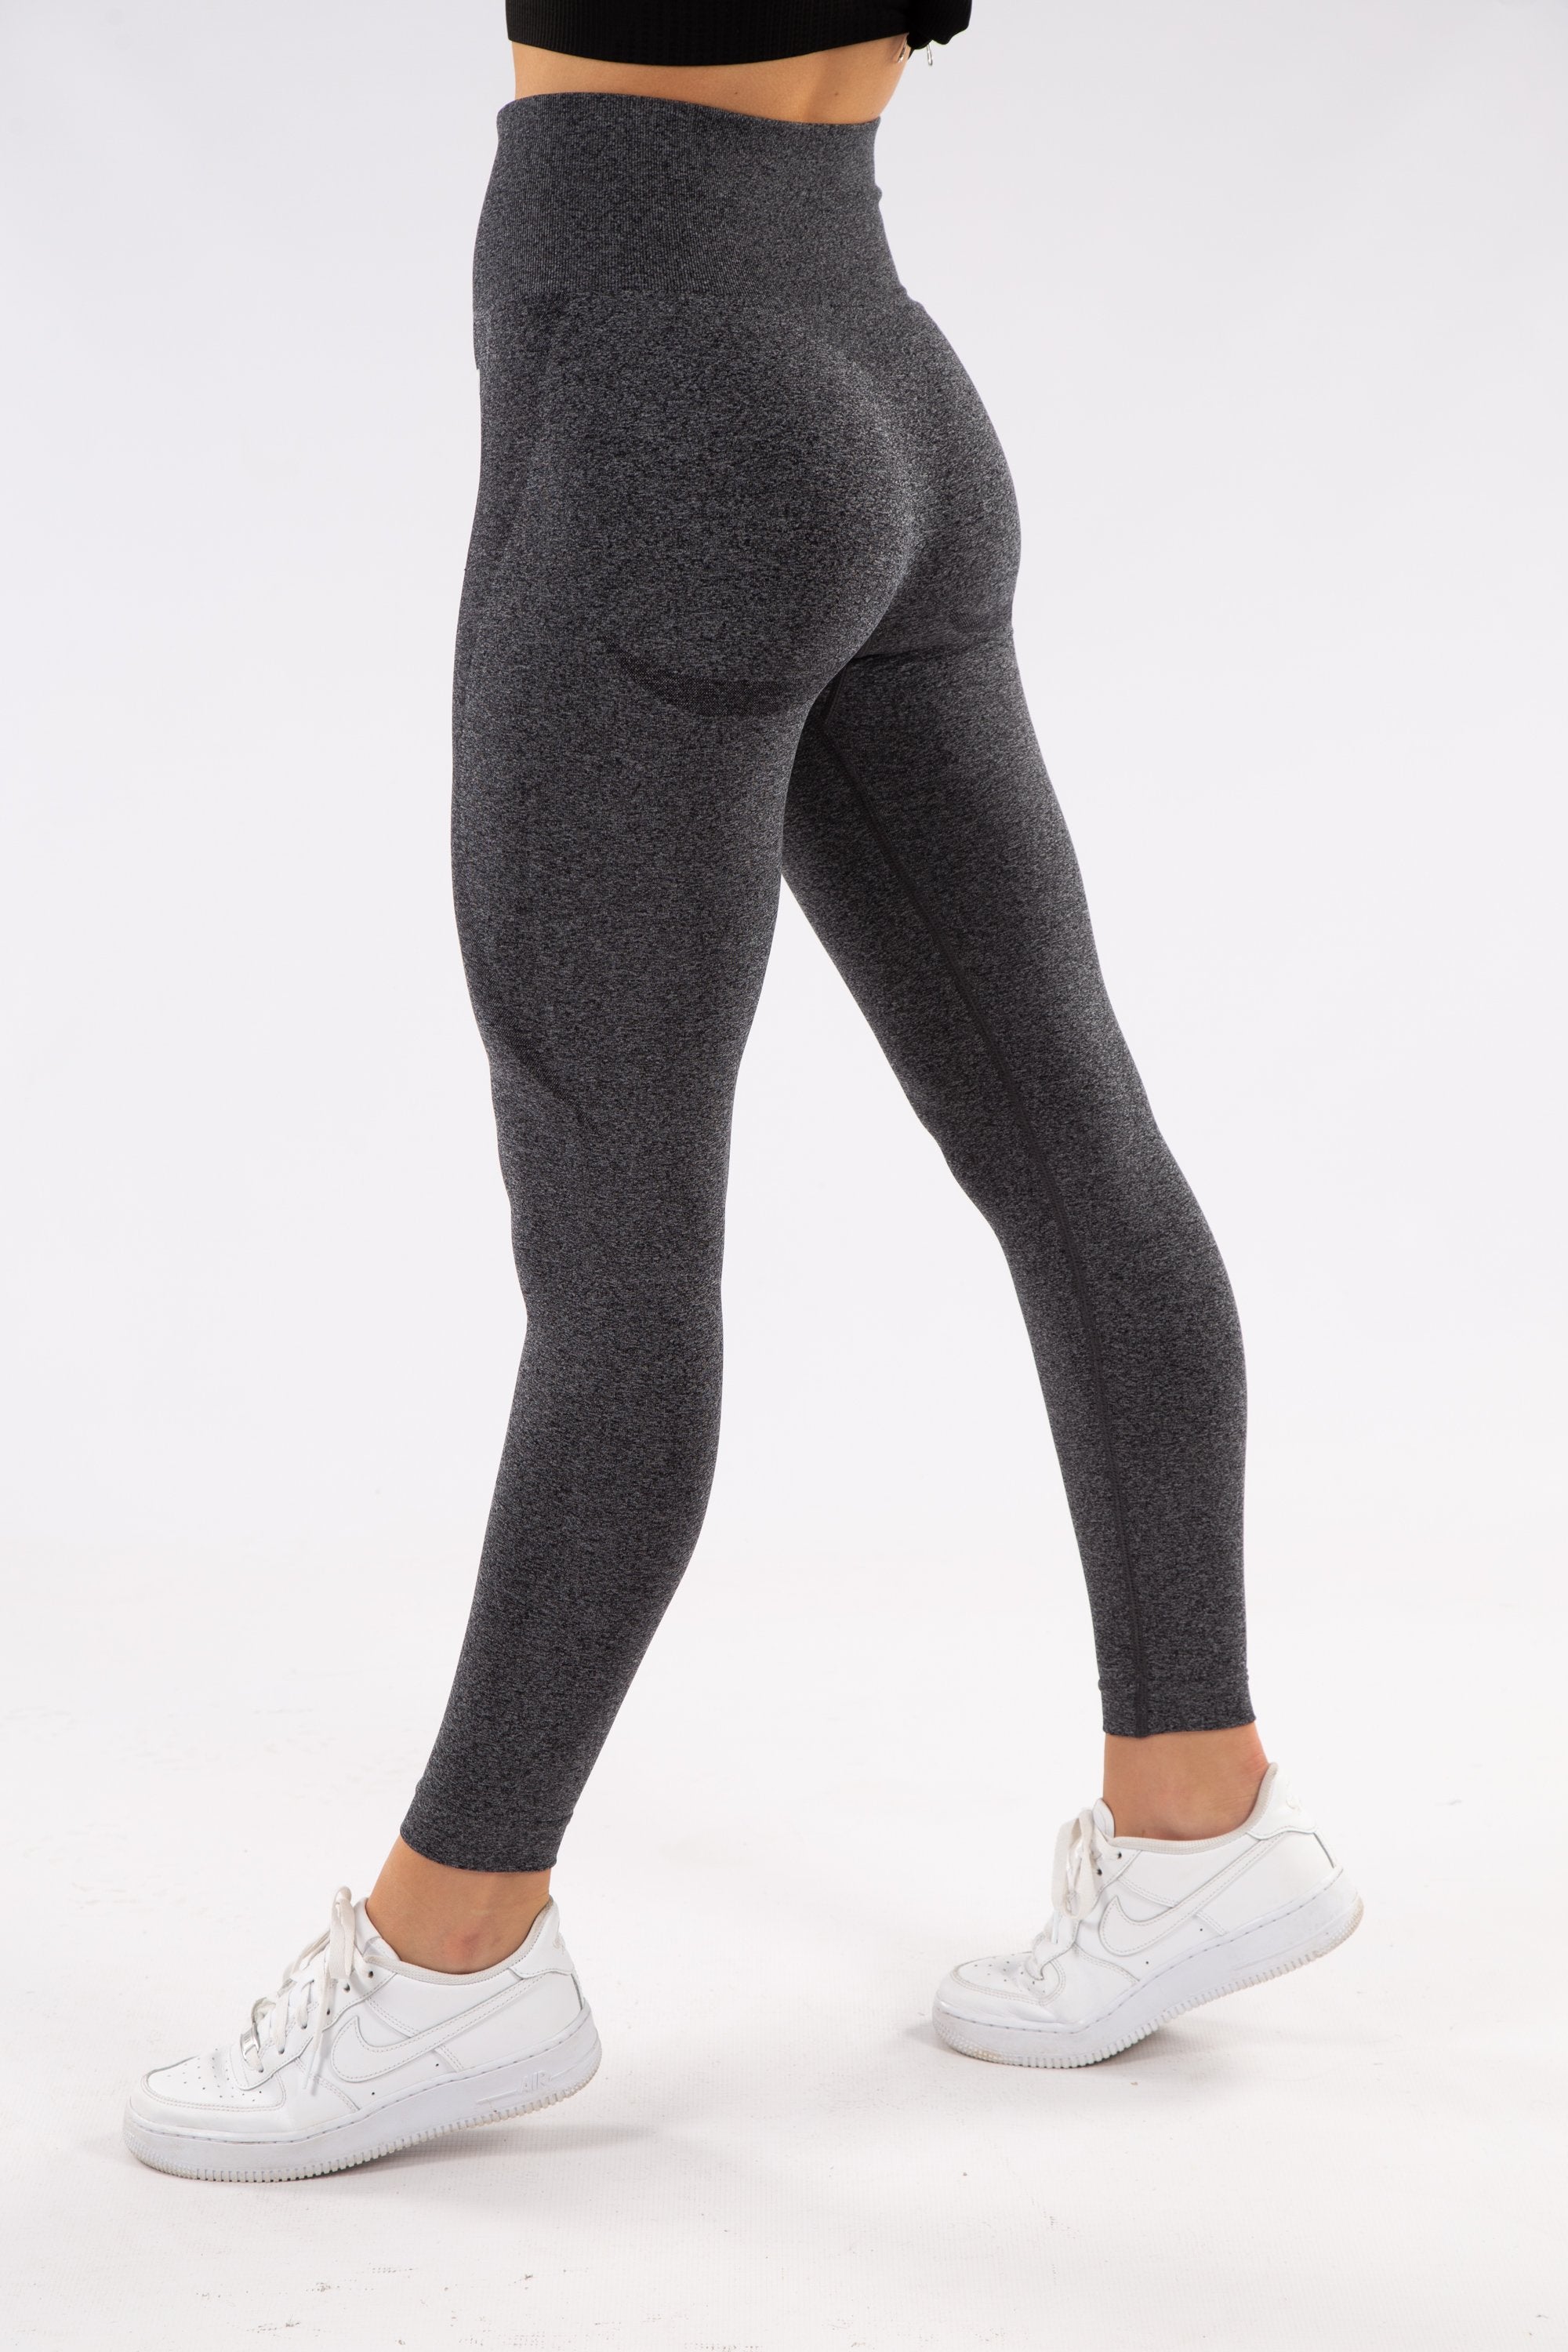 Seamless leggings have contour shadowing designed to enhance the beauty of  your natural curves. – Wonderfit Australia